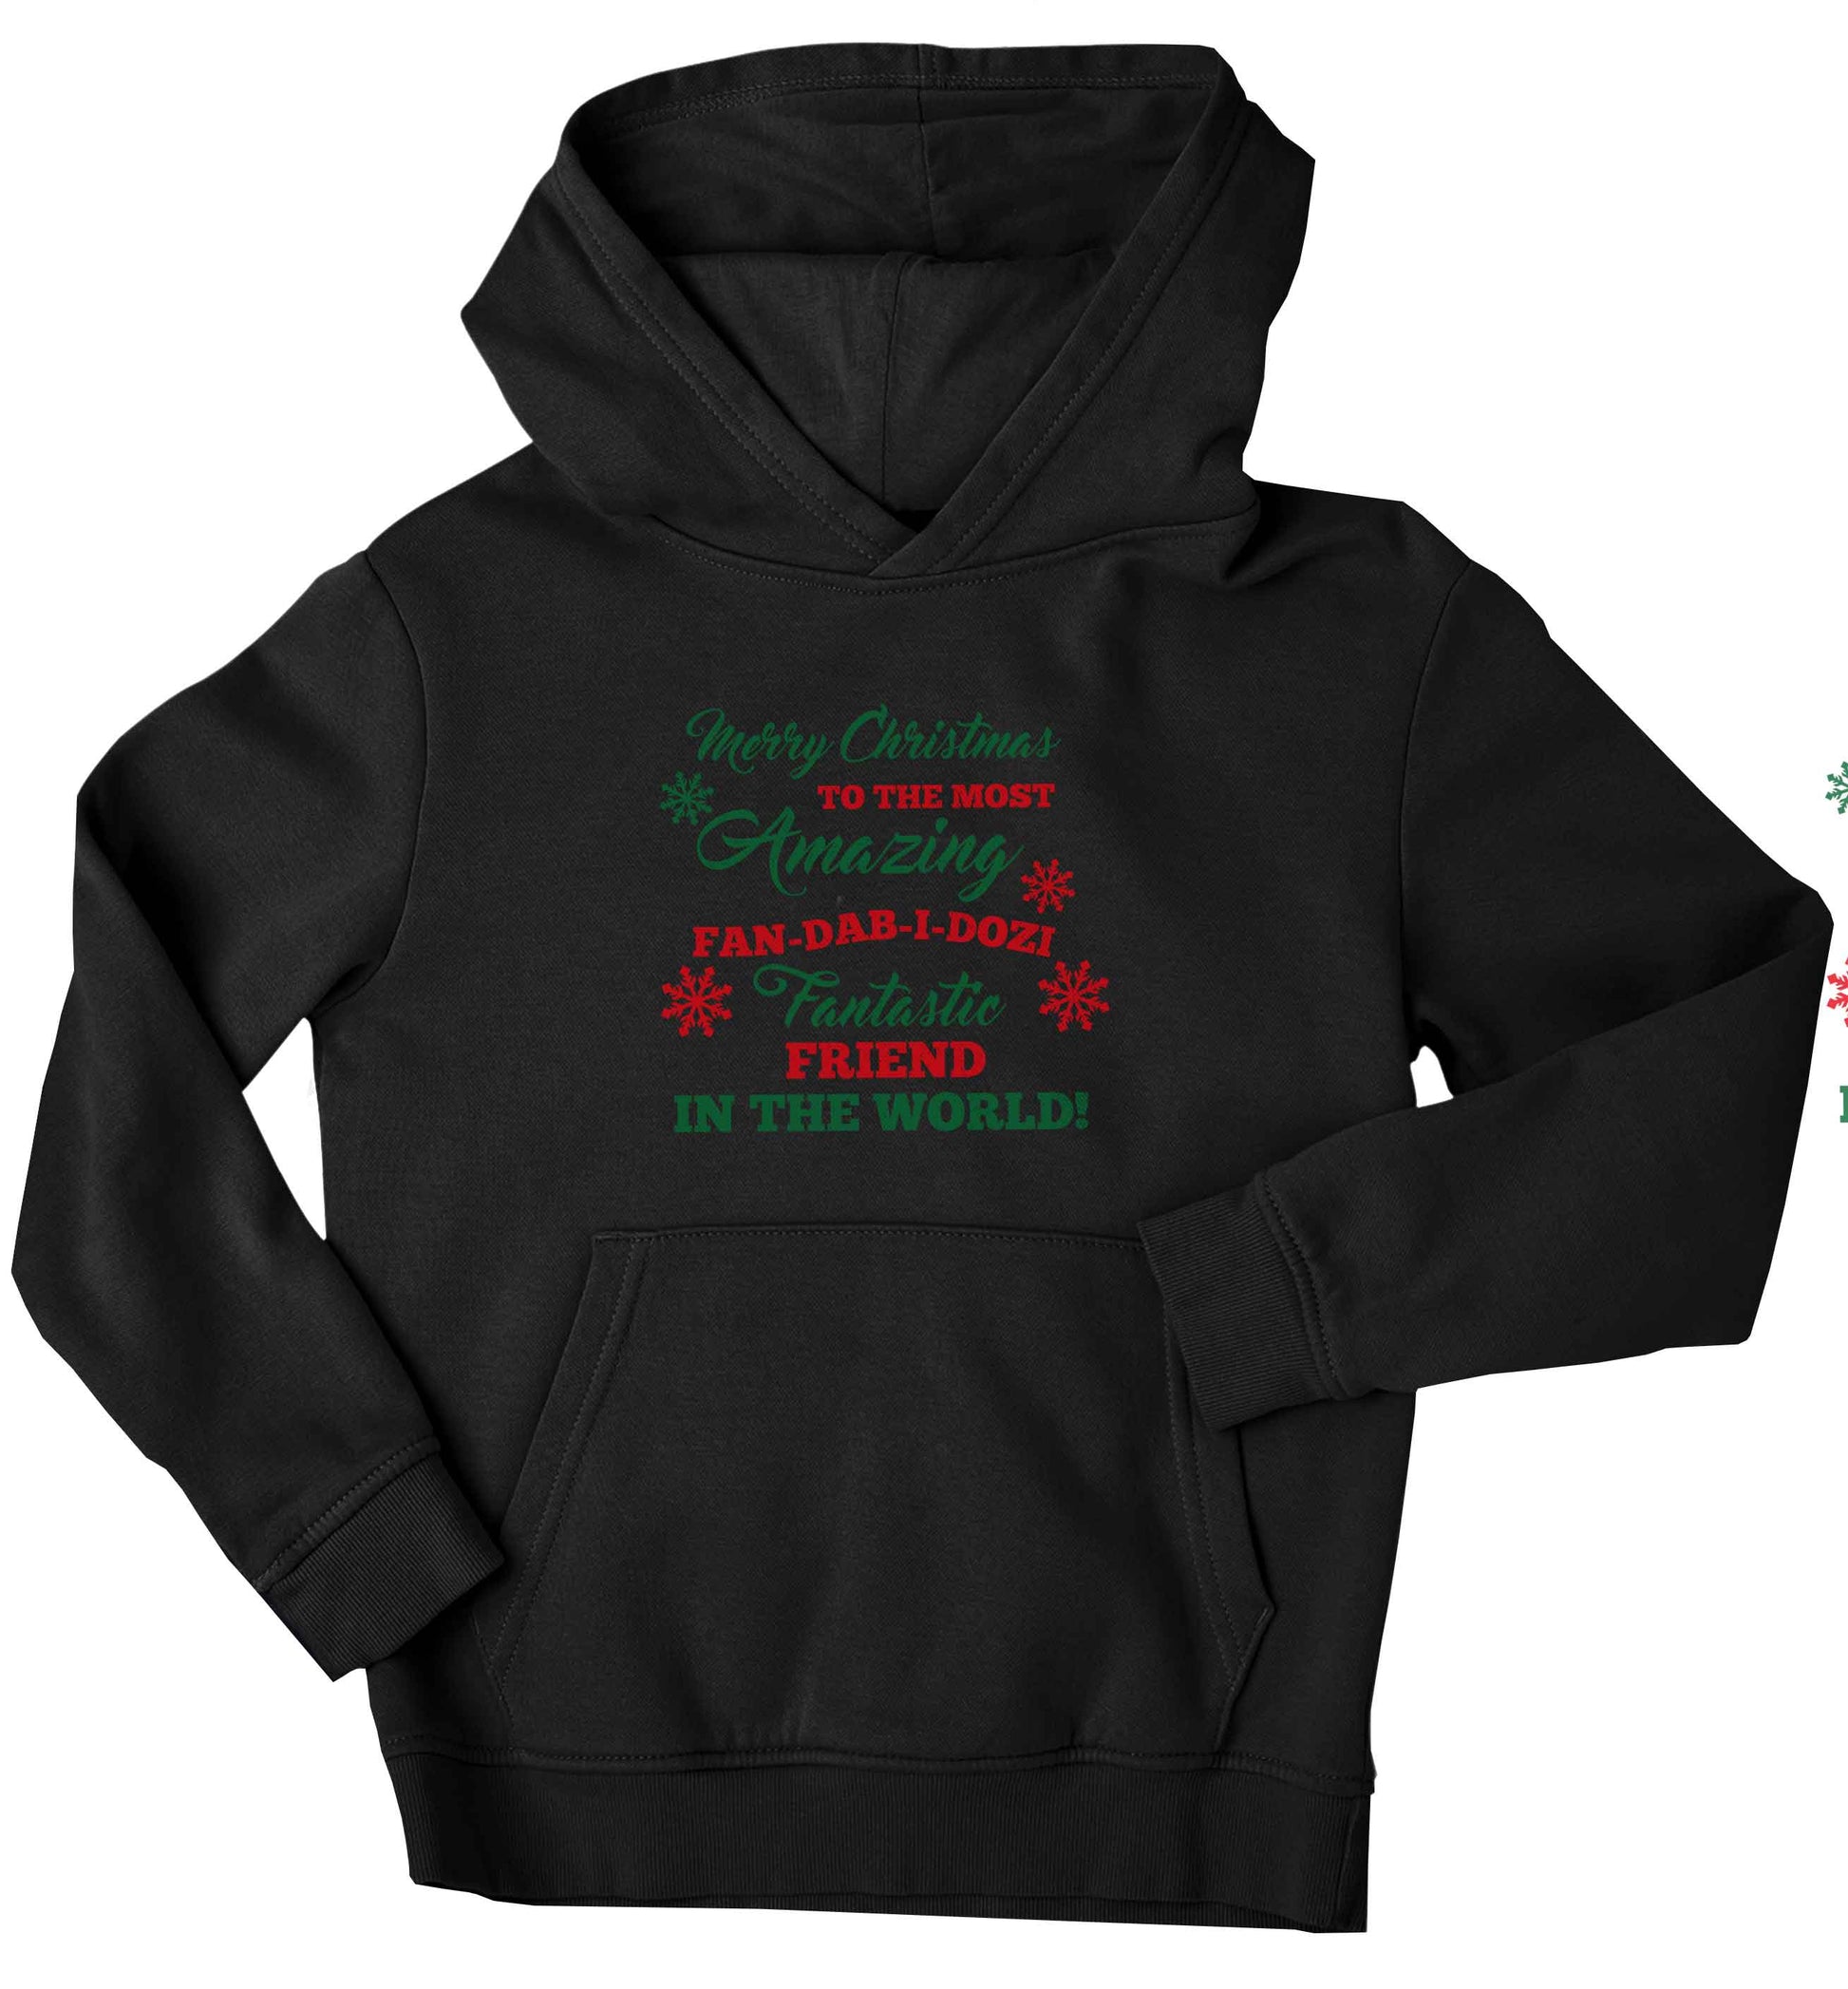 Merry Christmas to the most amazing fan-dab-i-dozi fantasic friend in the world children's black hoodie 12-13 Years